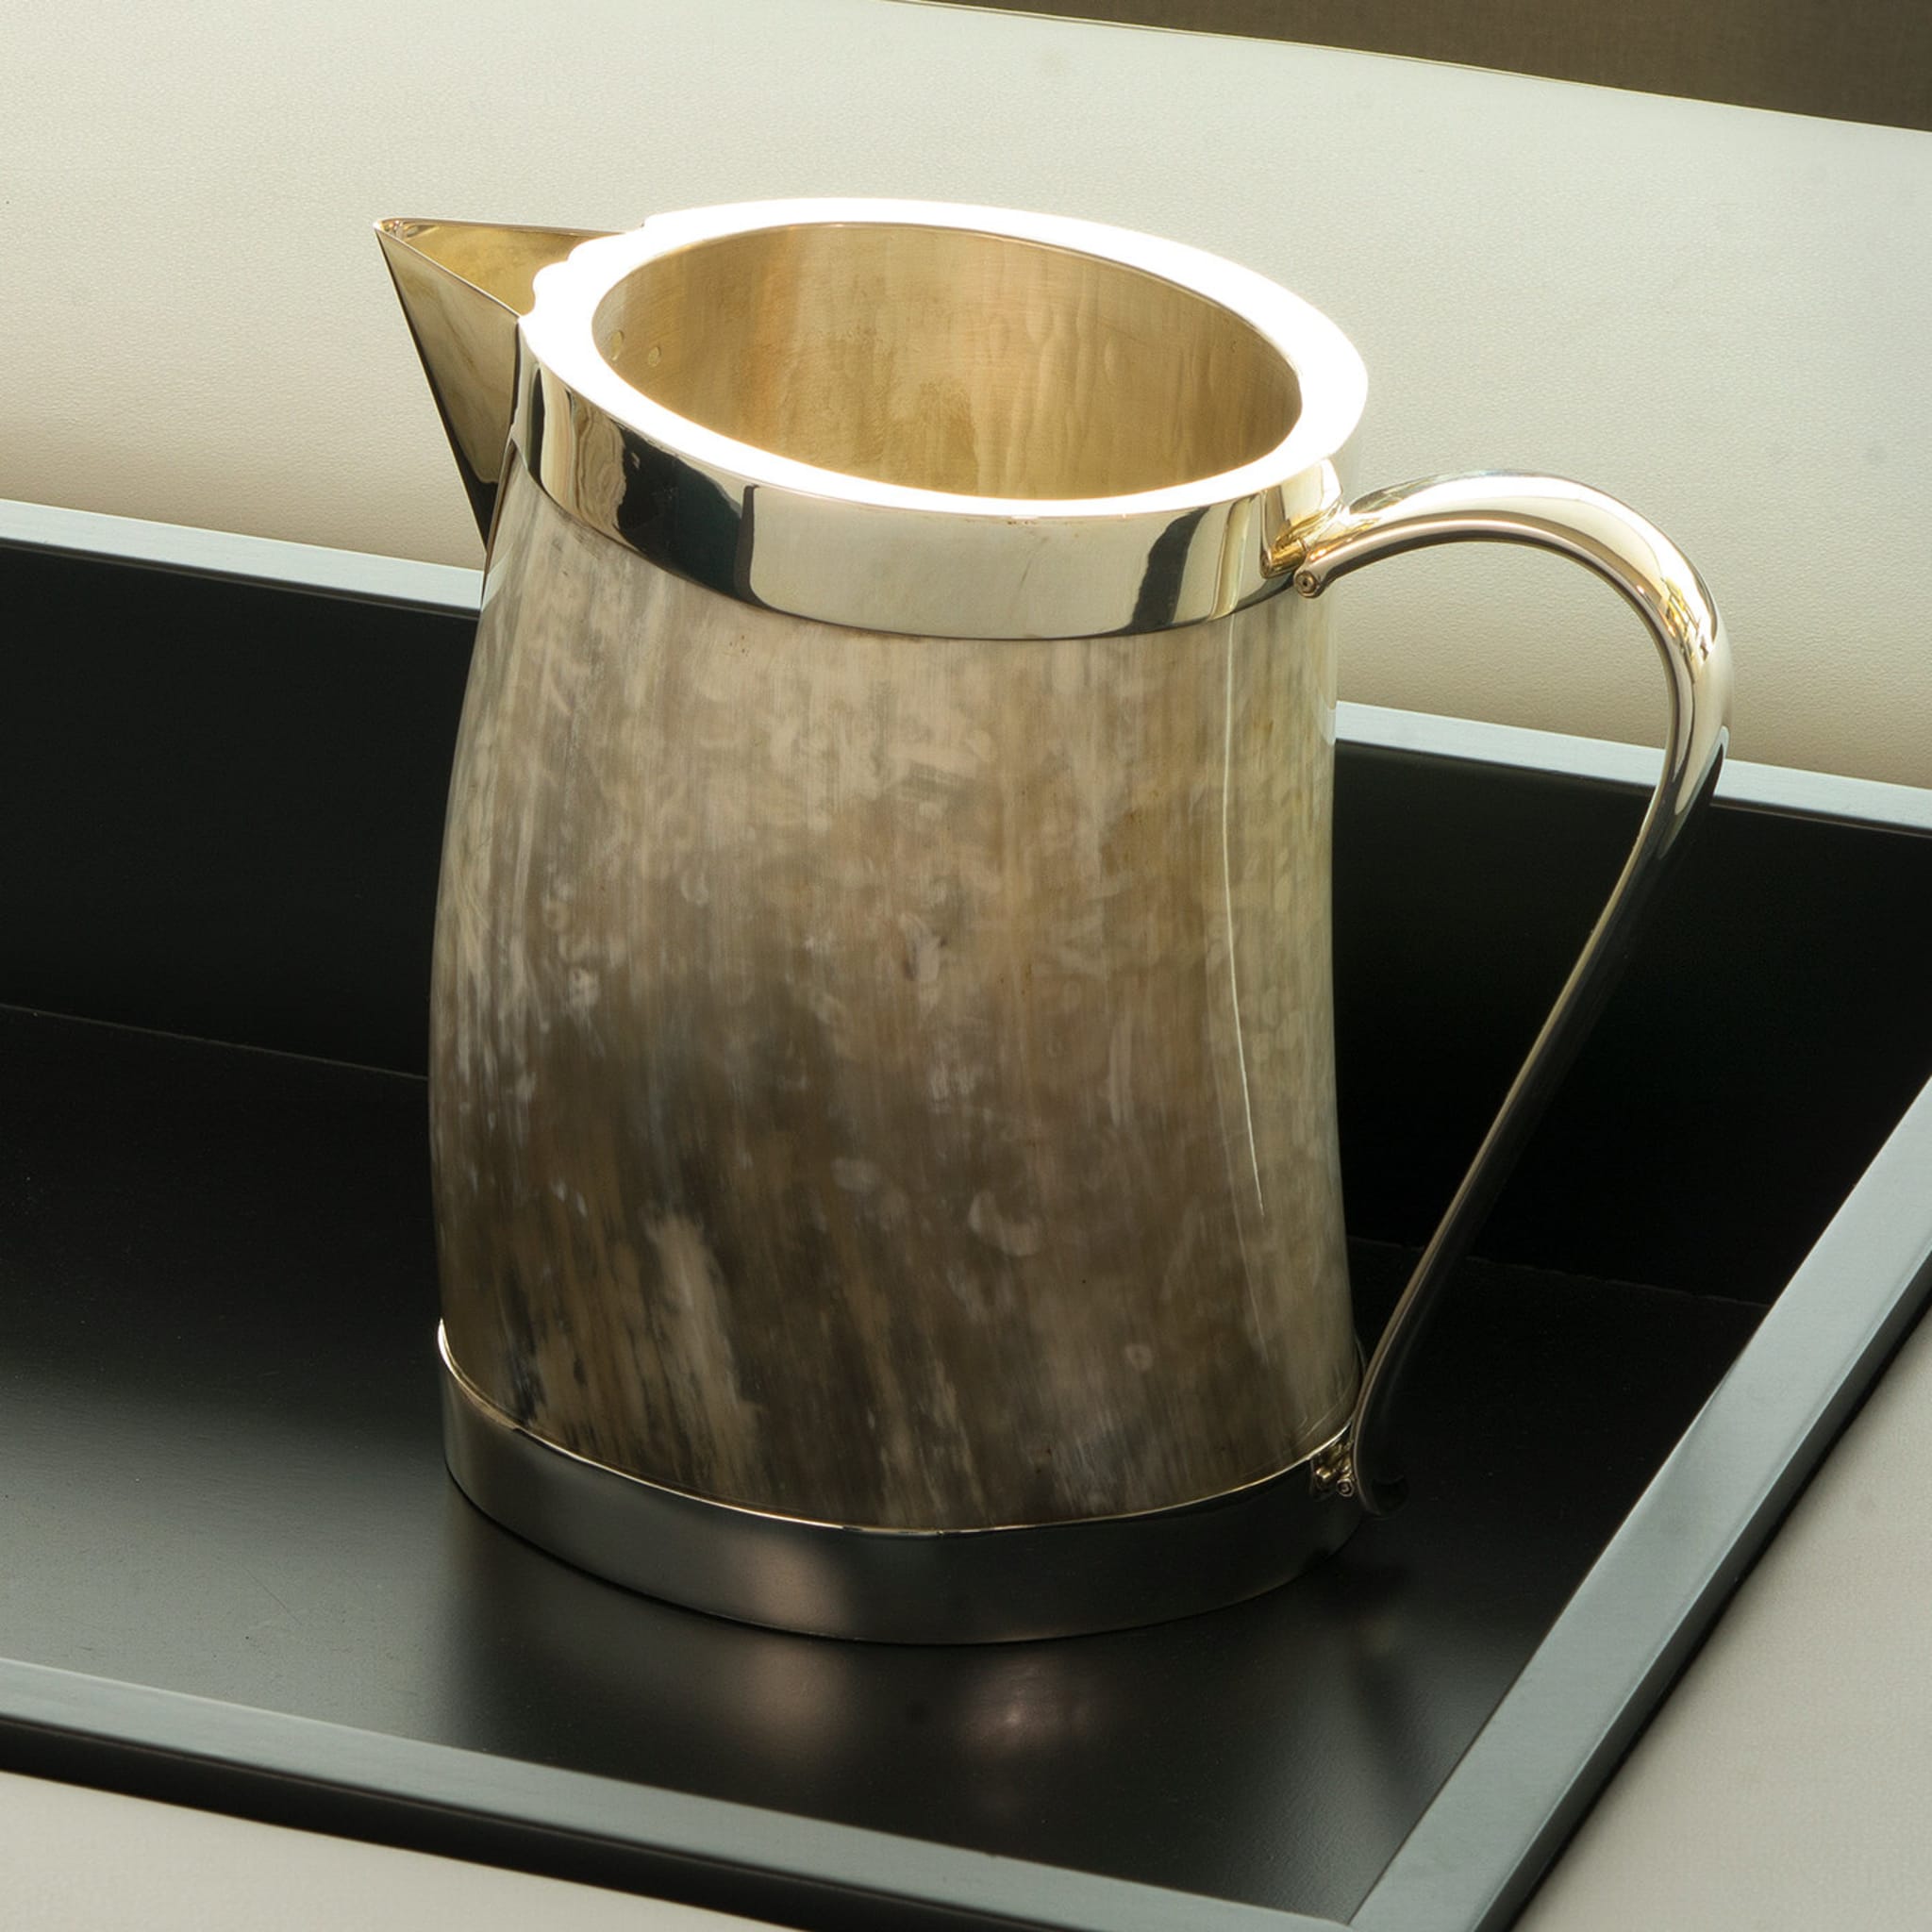 Silver and Horn Pitcher - Alternative view 1